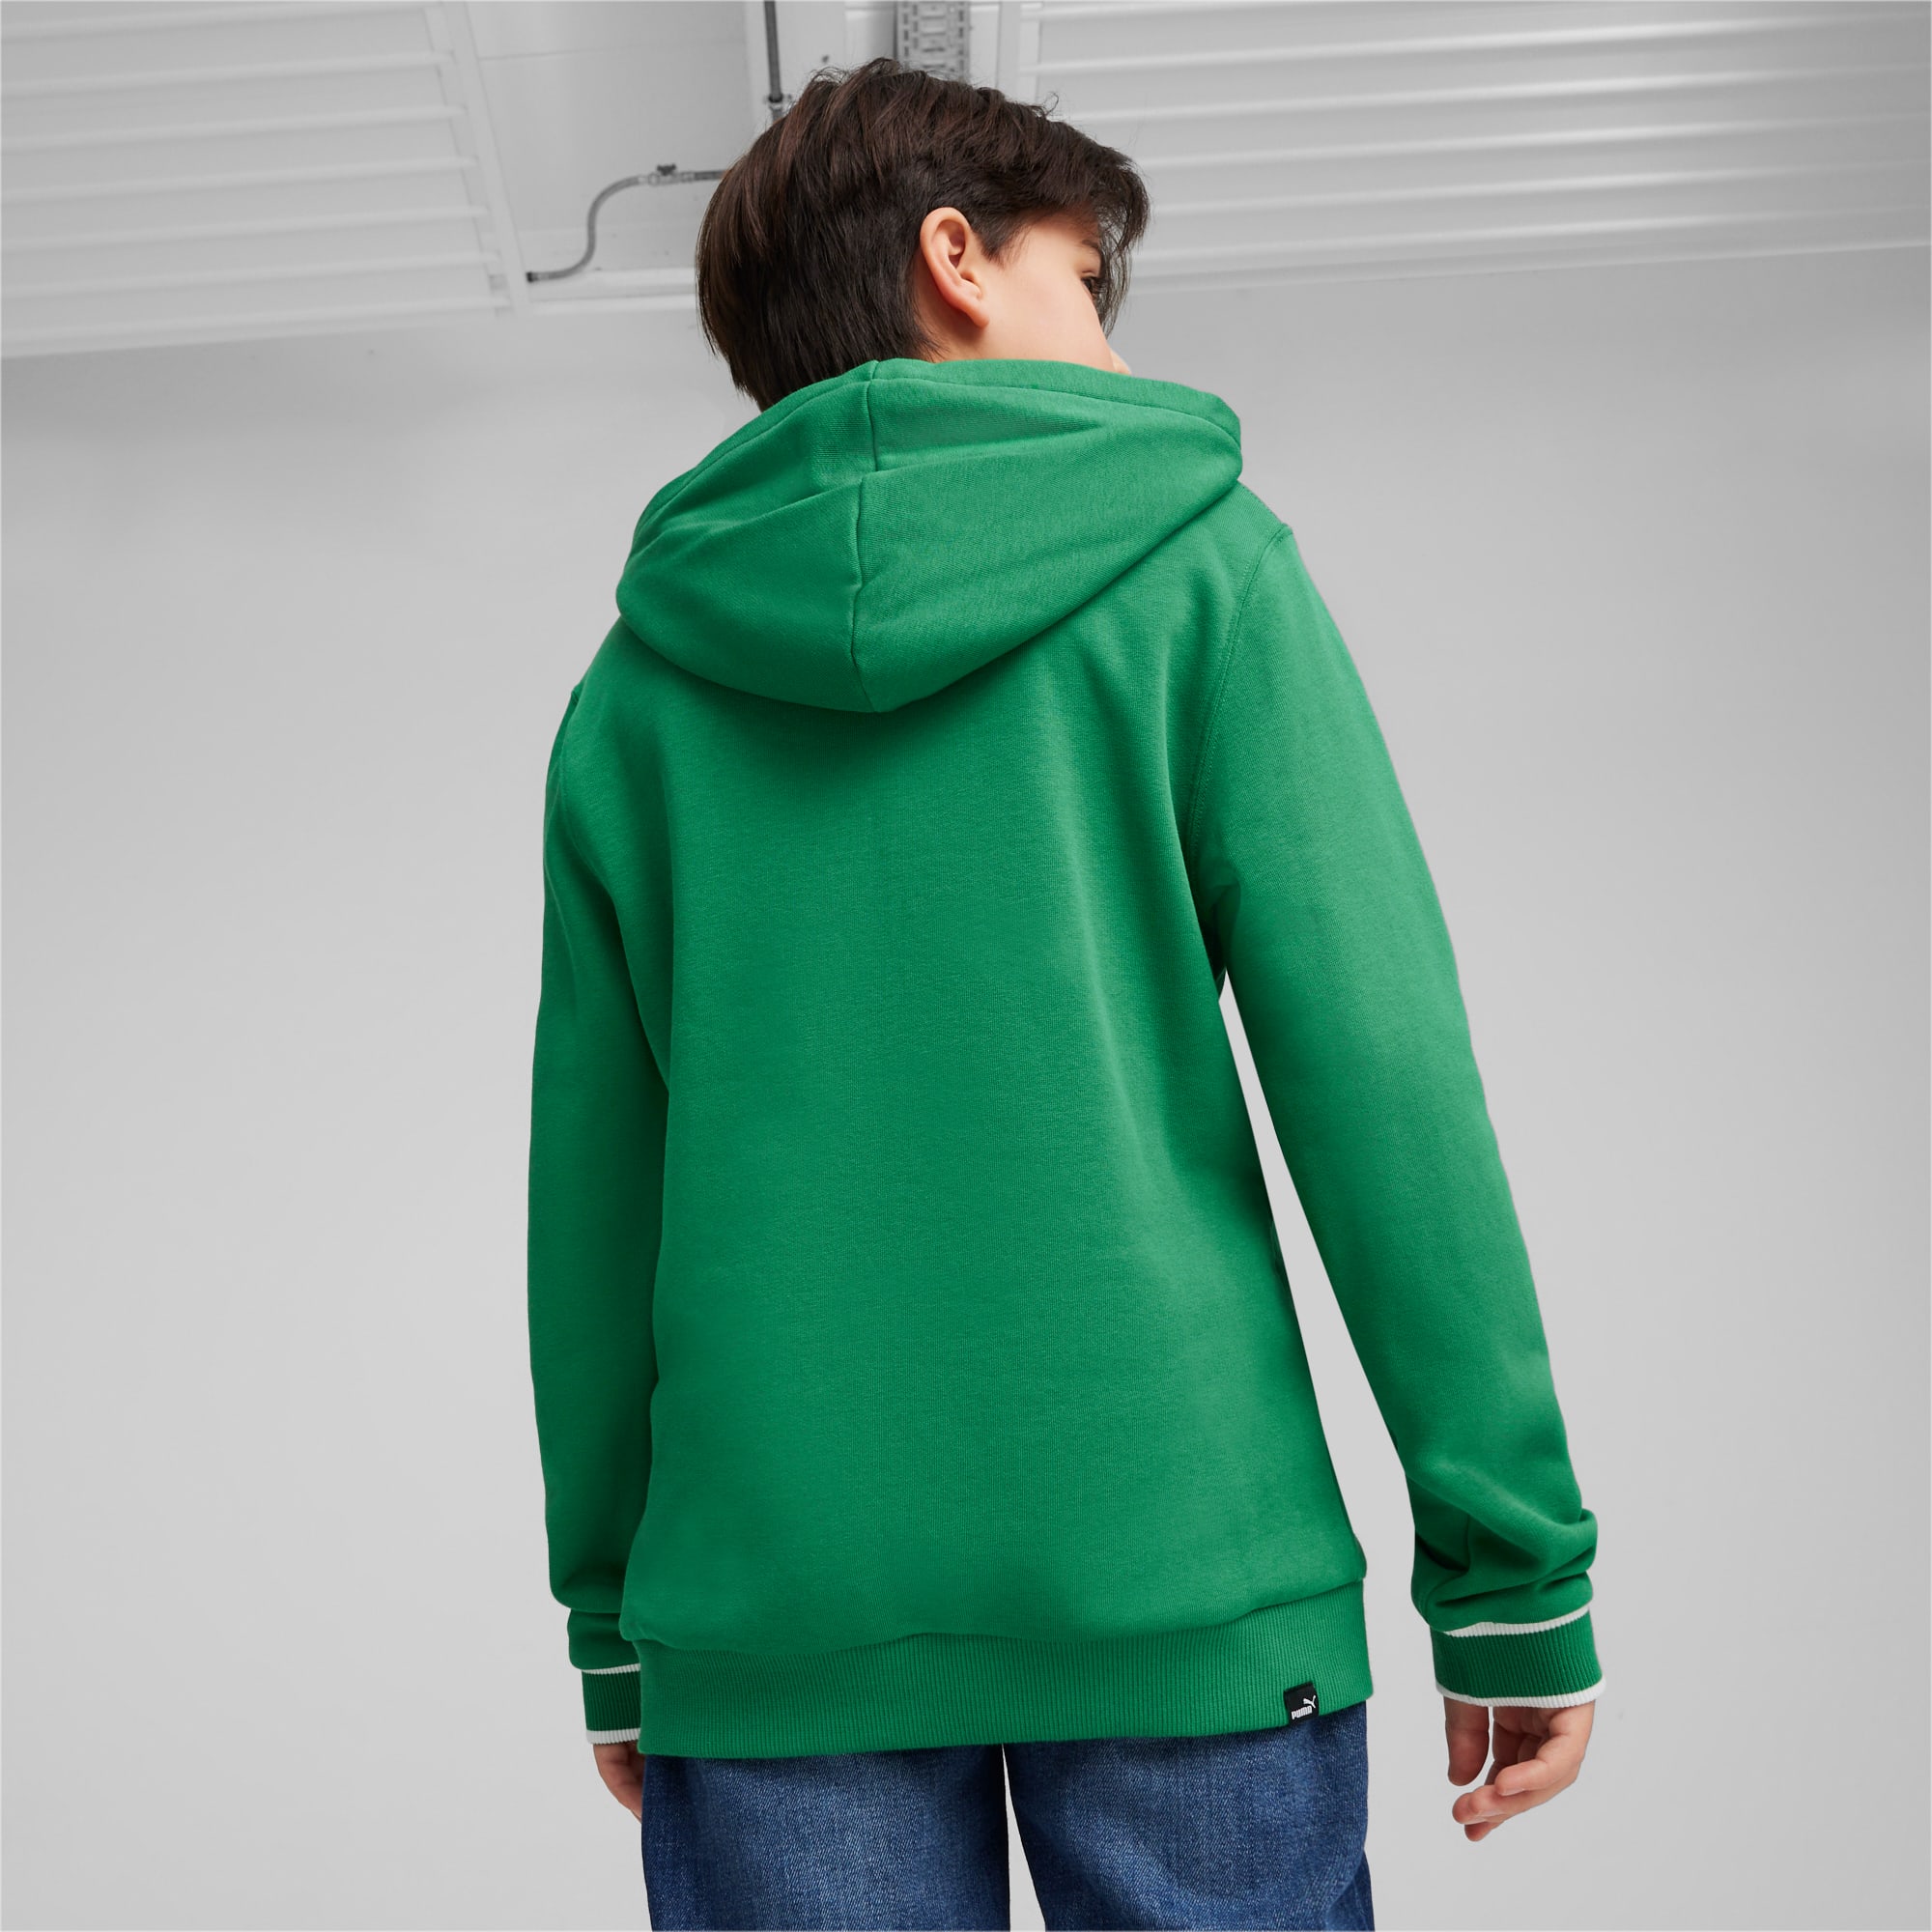 PUMA Squad Youth Hoodie, Archive Green, Size 128, Clothing